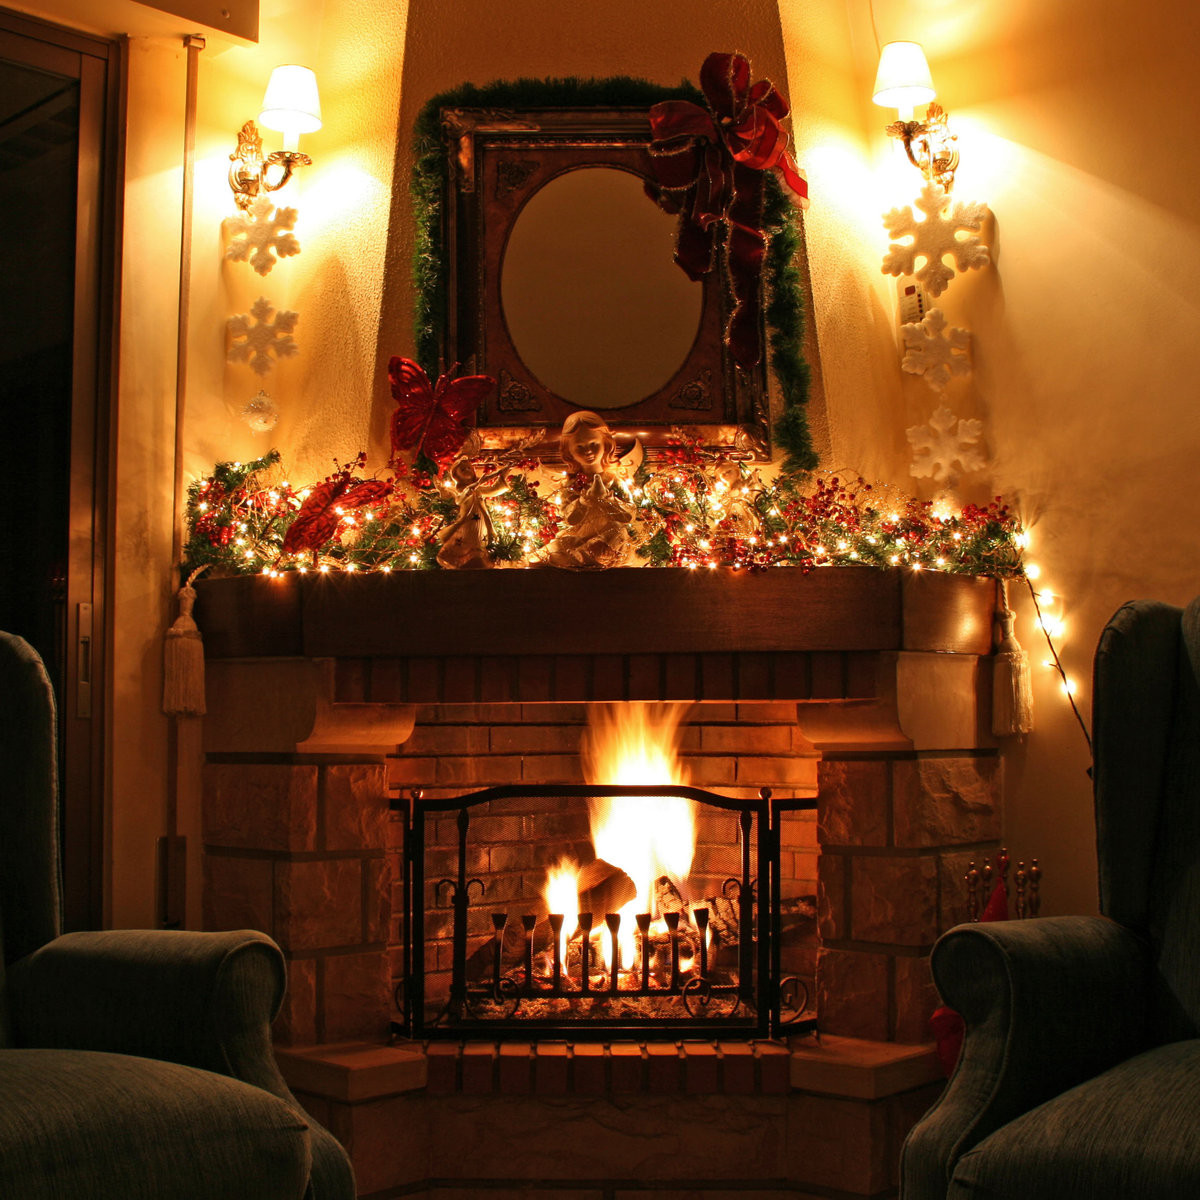 Christmas Music With Crackling Fireplace
 Relaxing Fire Sound 1 hour Christmas Fireplace with